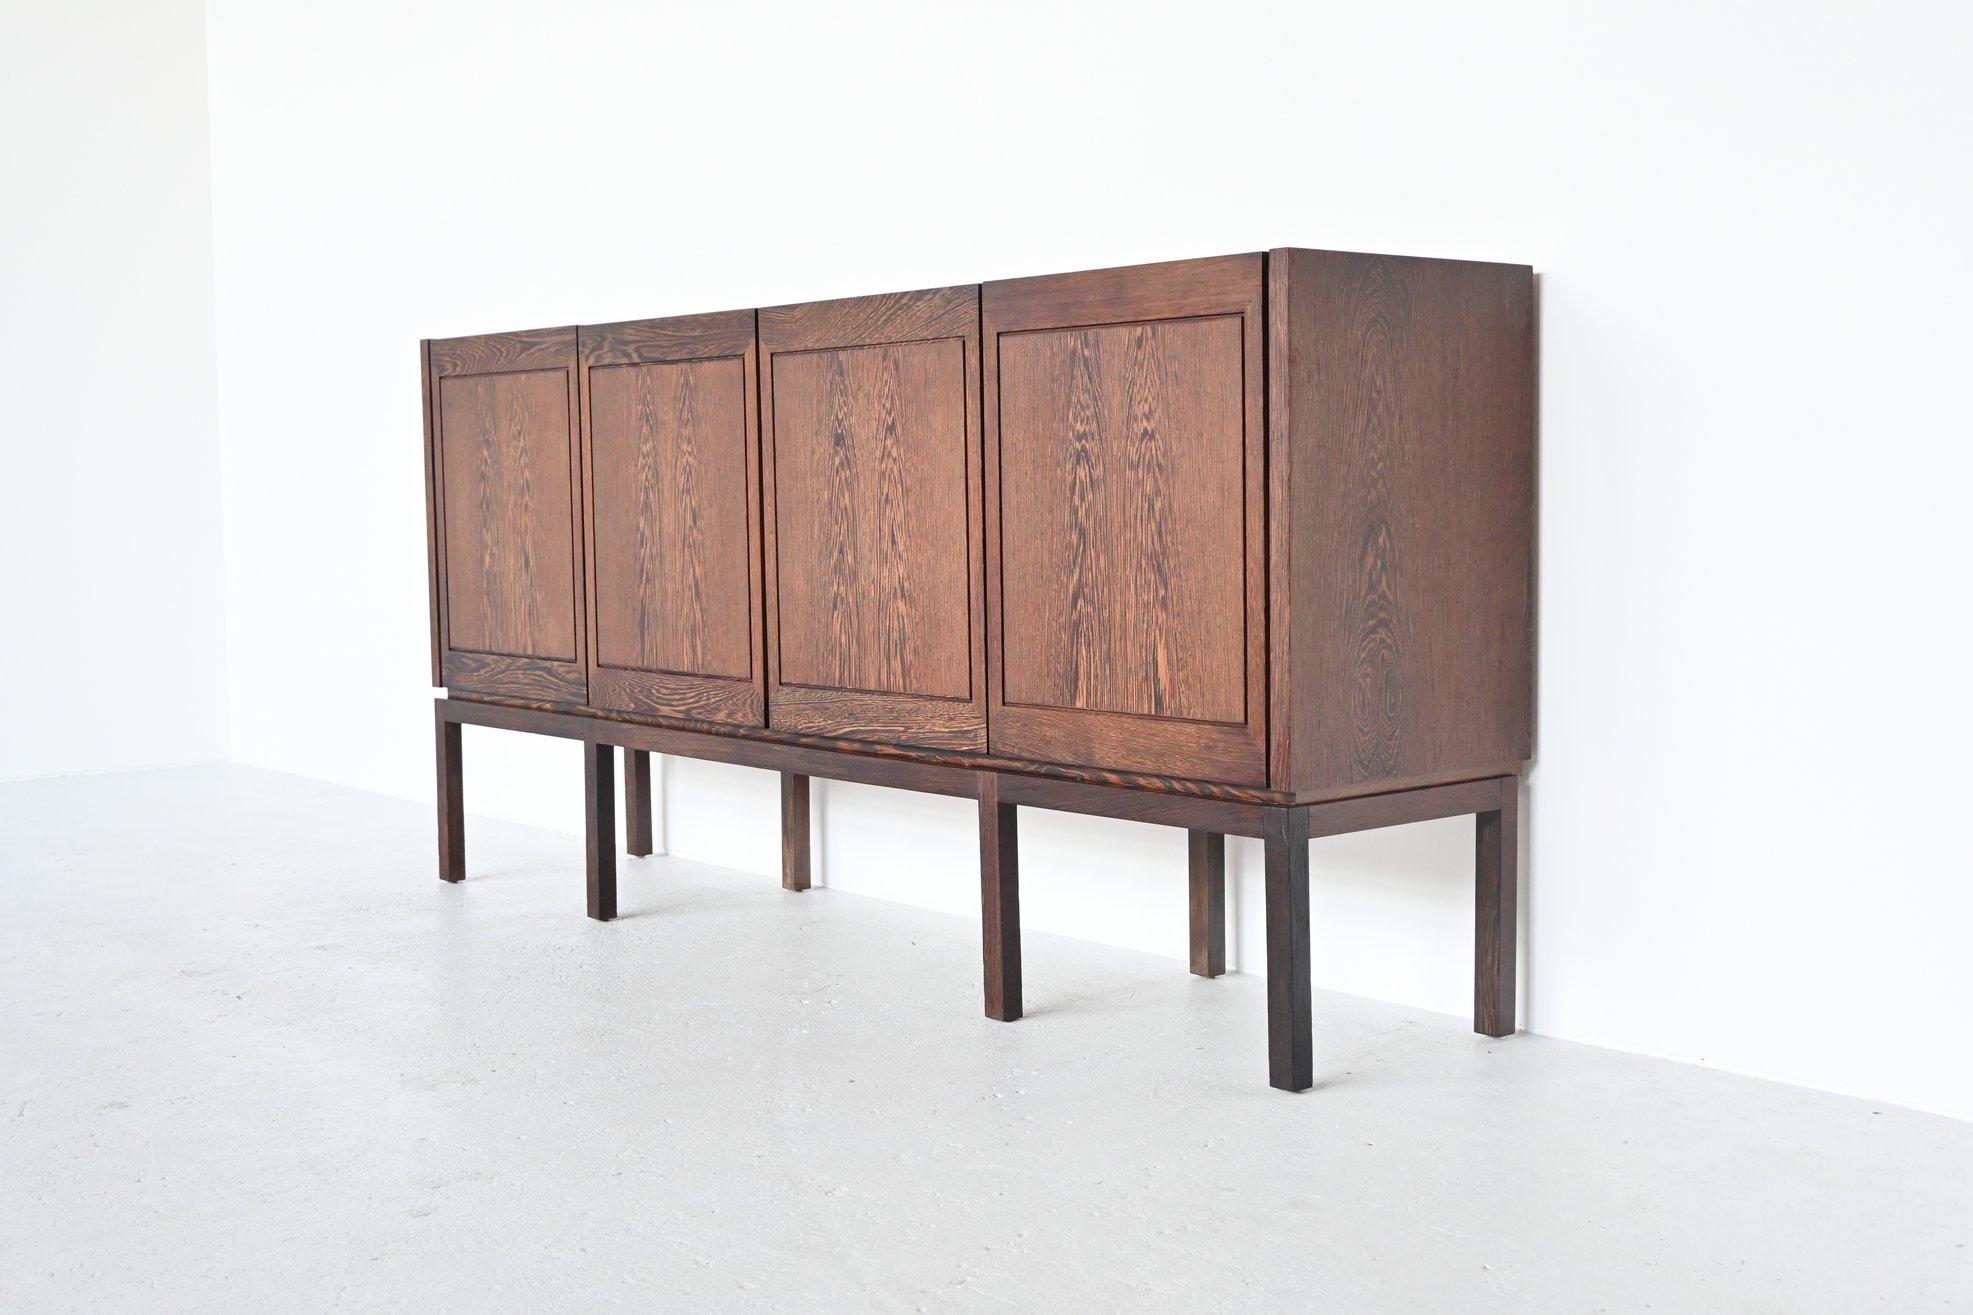 Very nice unusual sideboard manufactured by Royal Board, Sweden, 1960. This symmetric sideboard has a beautiful grain to its wenge wood veneered doors and is in fully original condition. It’s a very nicely crafted piece of Danish midcentury